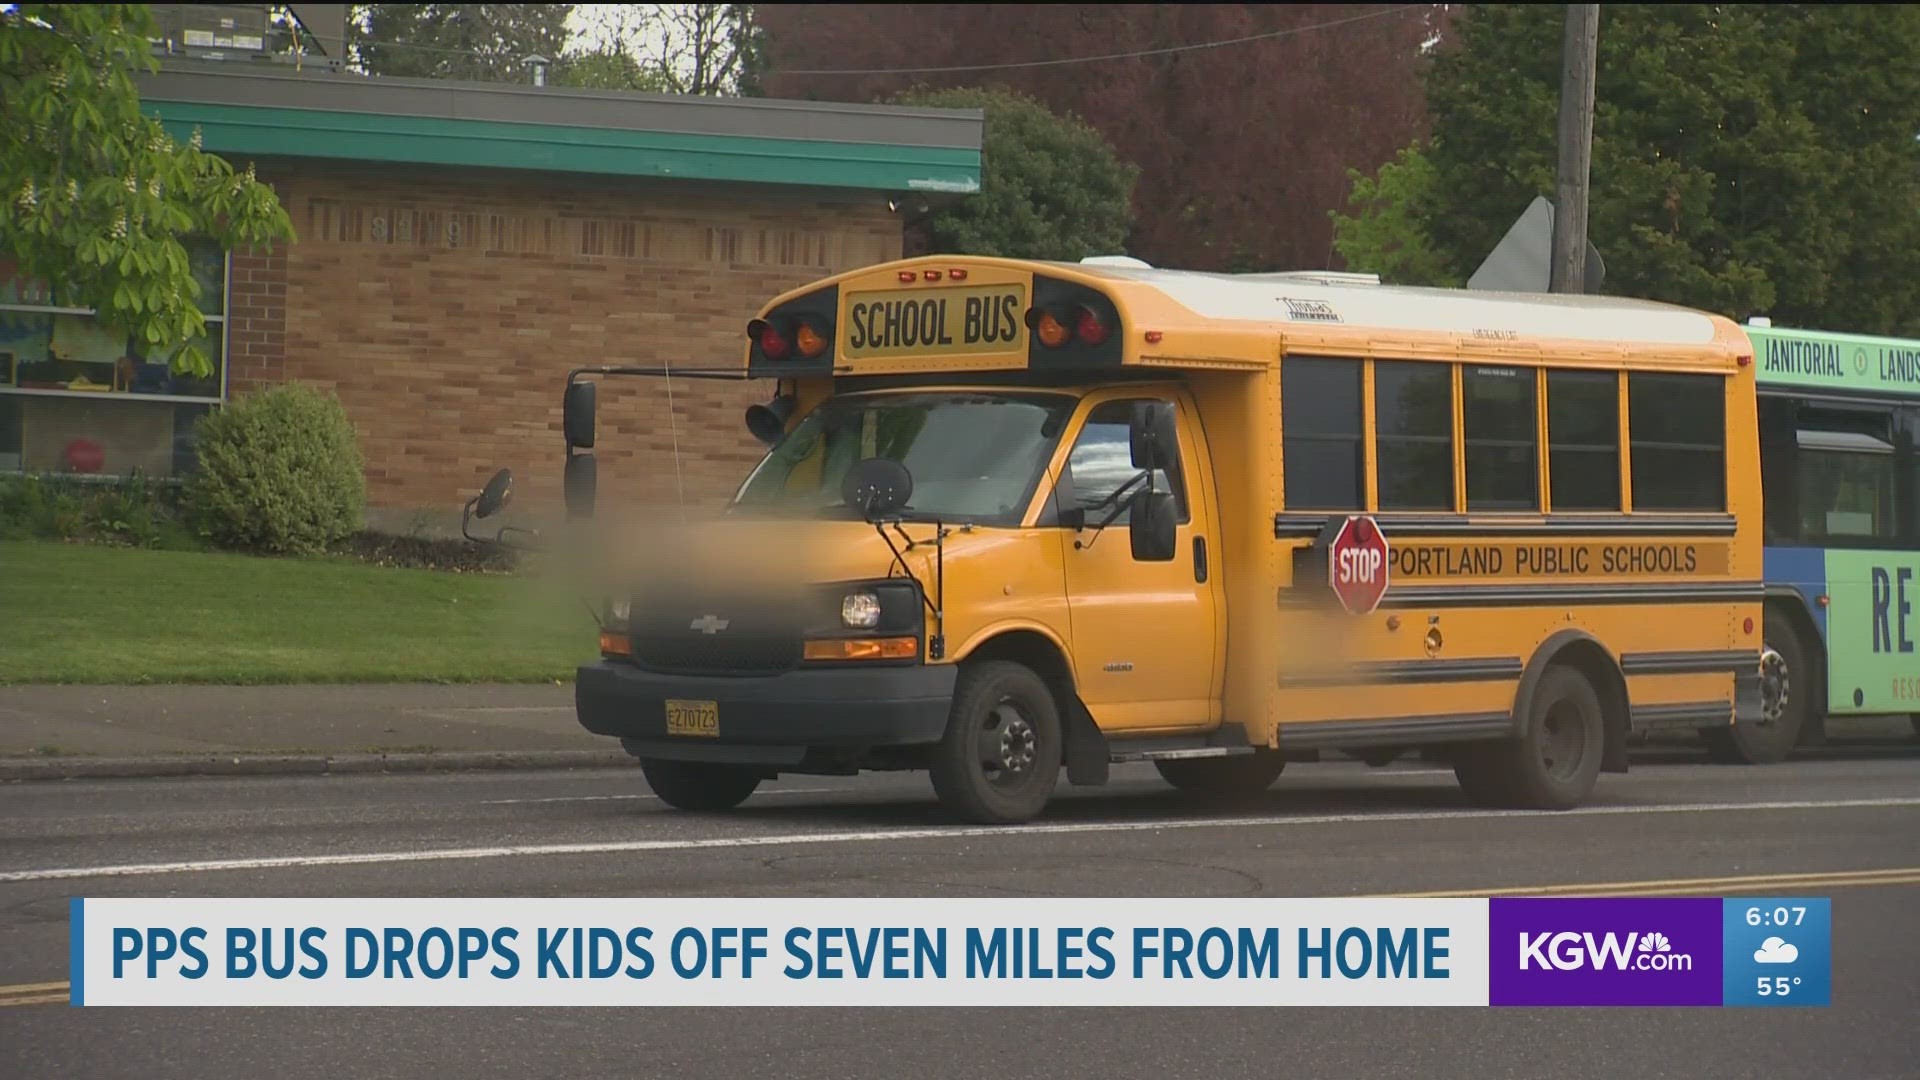 A Portland Public School’s bus driver accidentally drops off two students with special needs 7 miles away from their home unaware they are in the wrong location.